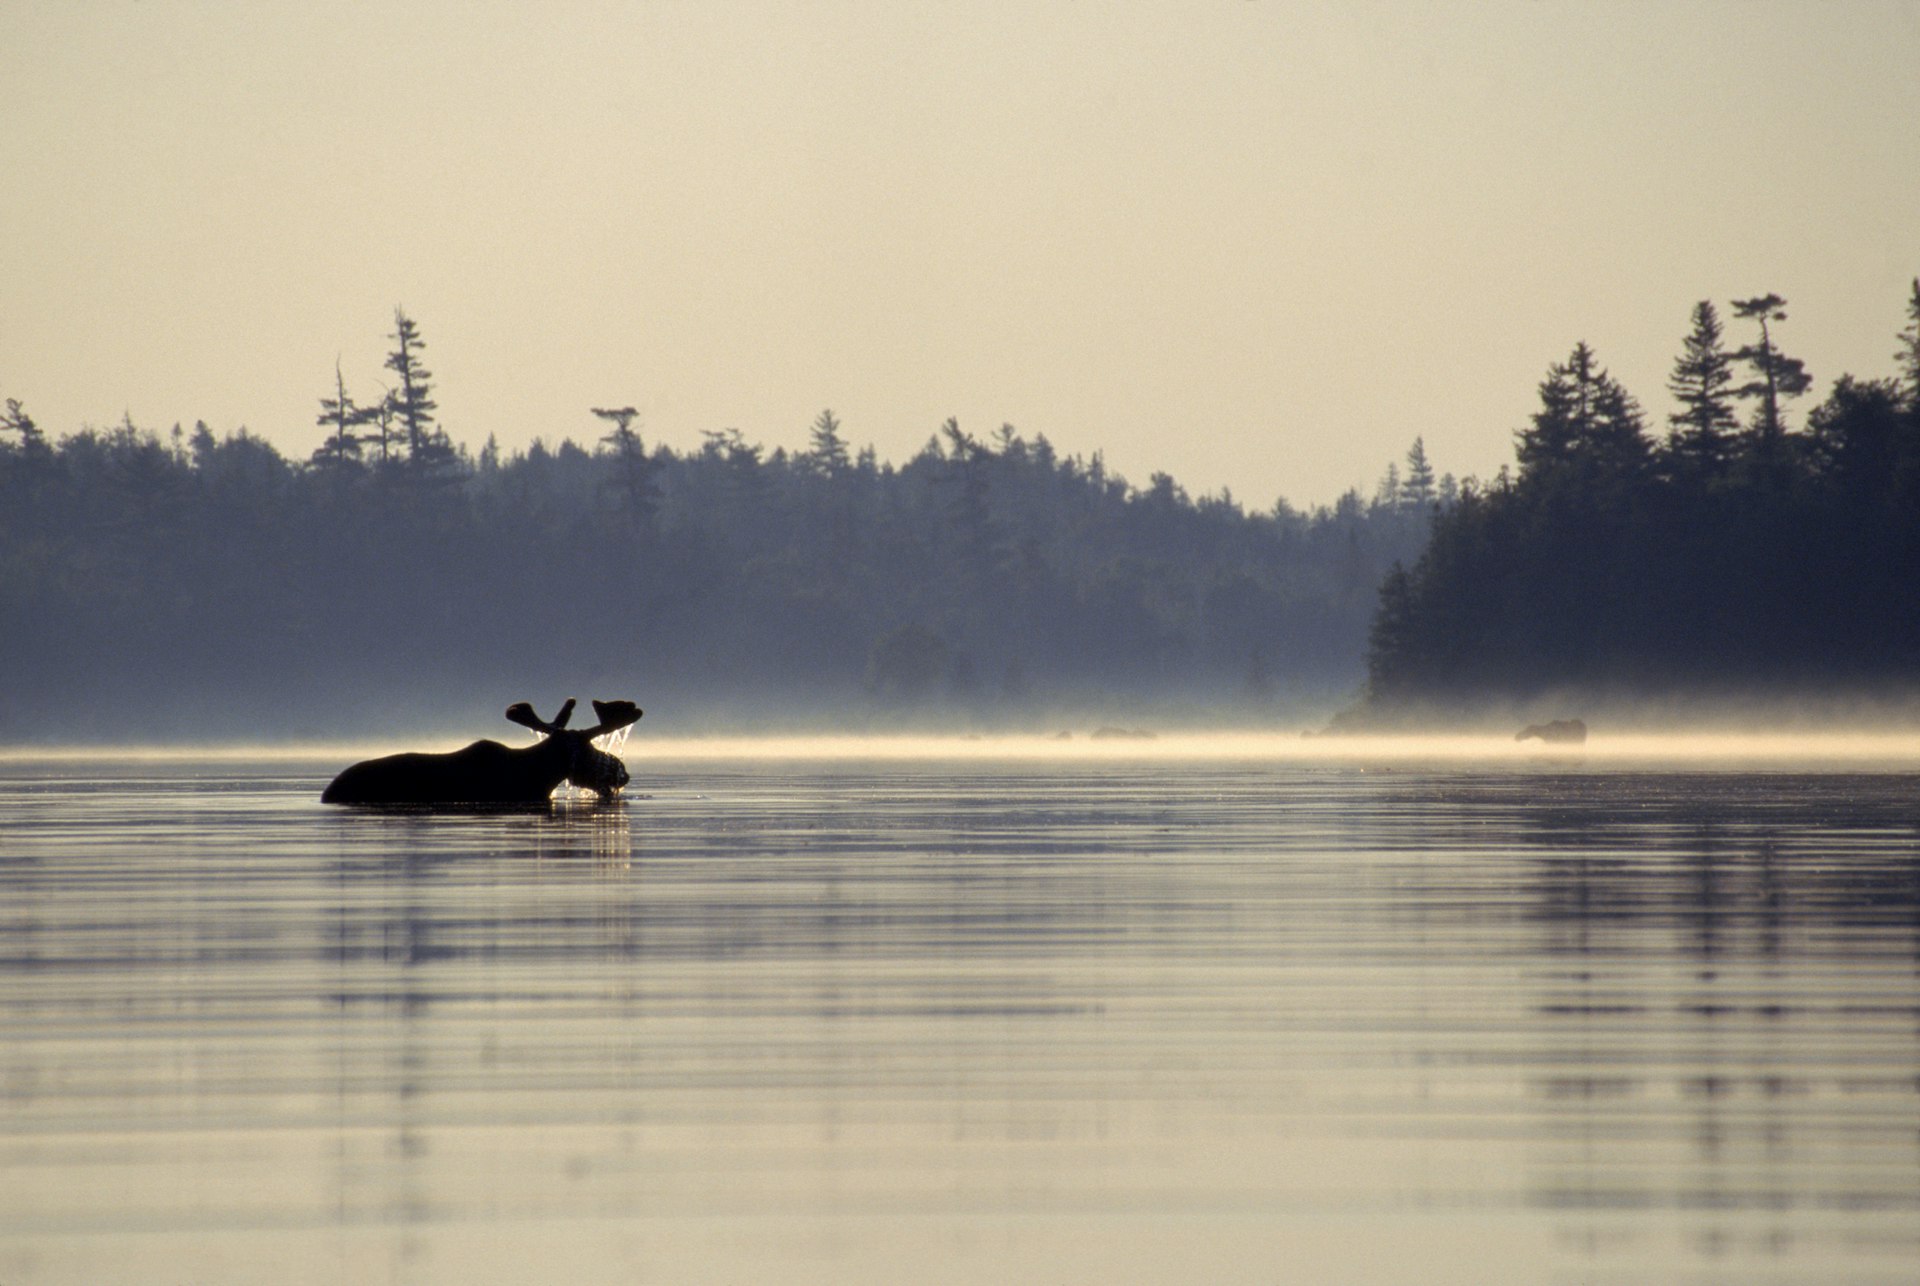 A moose in silhouette stands in a lake in the morning mist